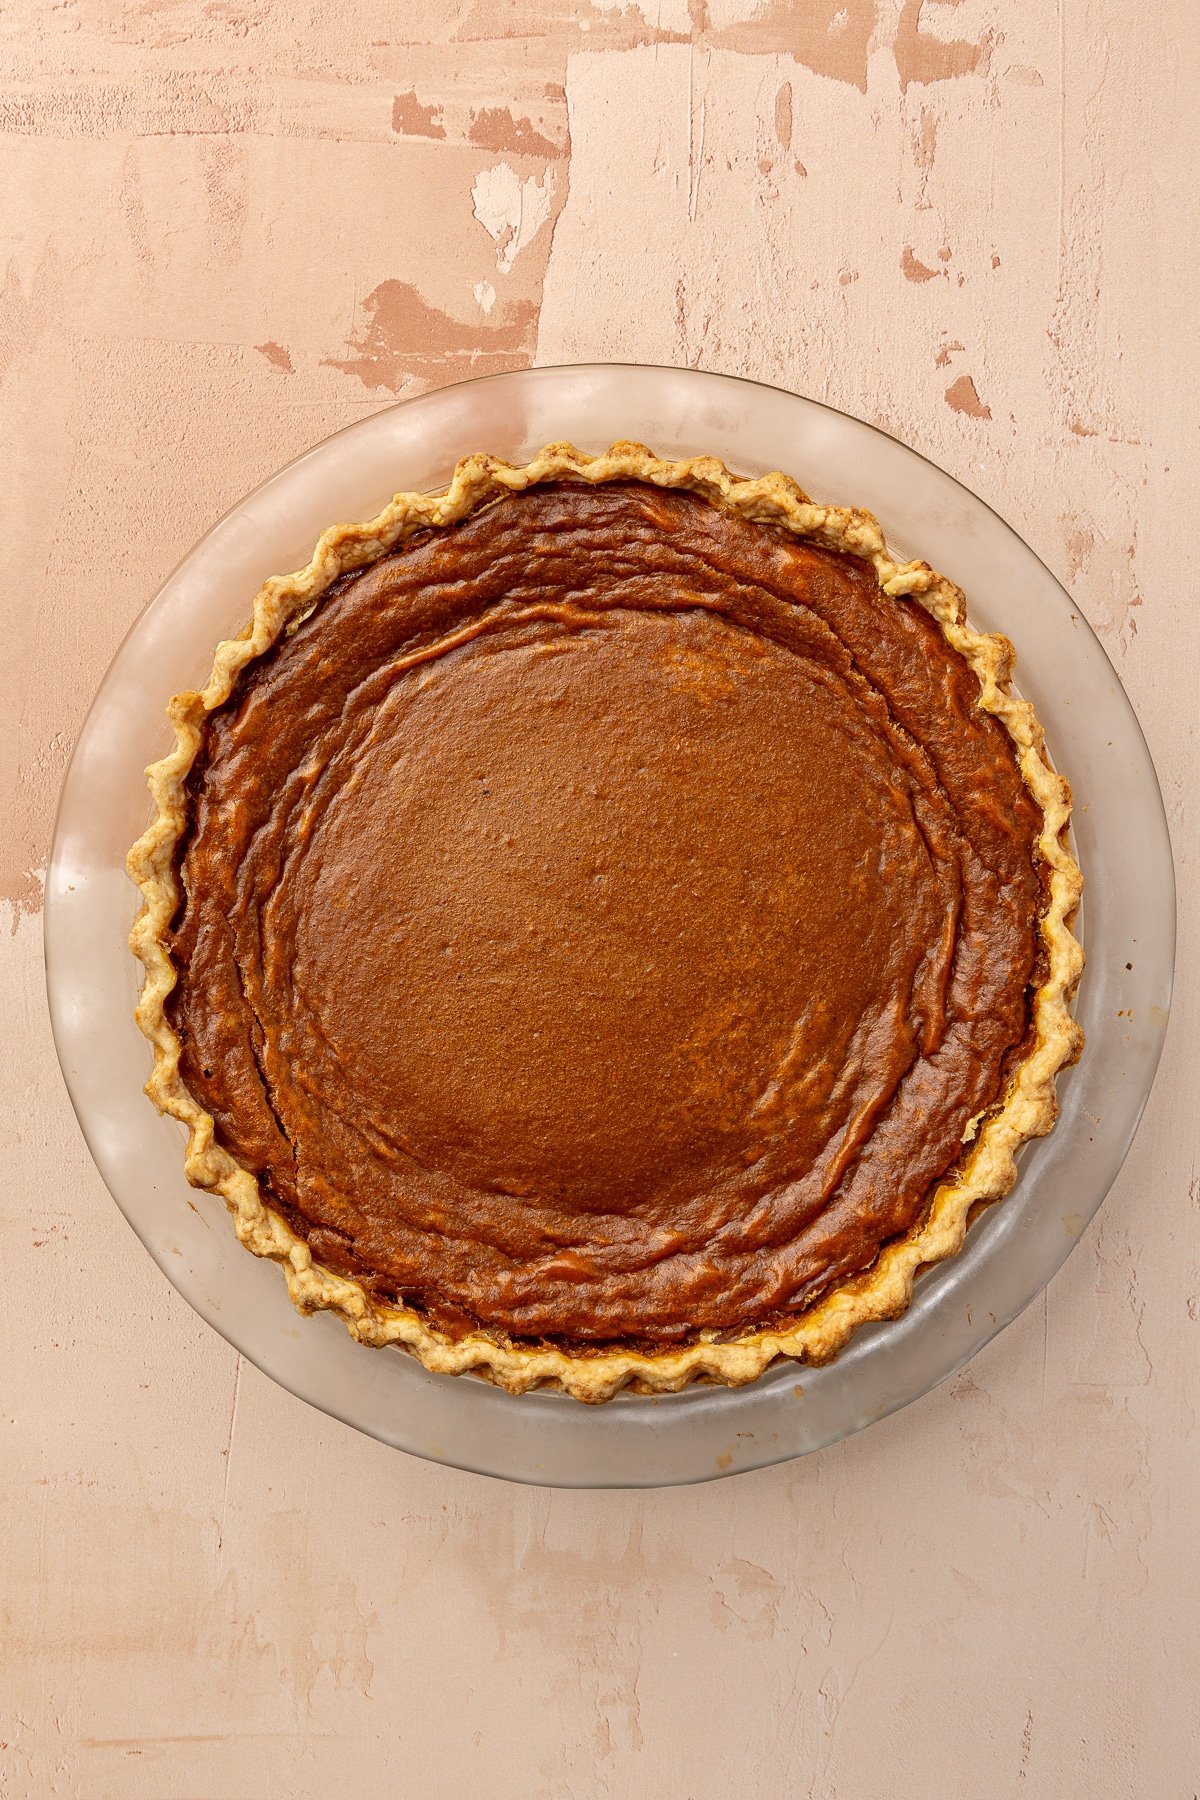 A fully cooked, now dark brown tin color, sweet potato pie remains in its glass pie dish on a muted pink background.